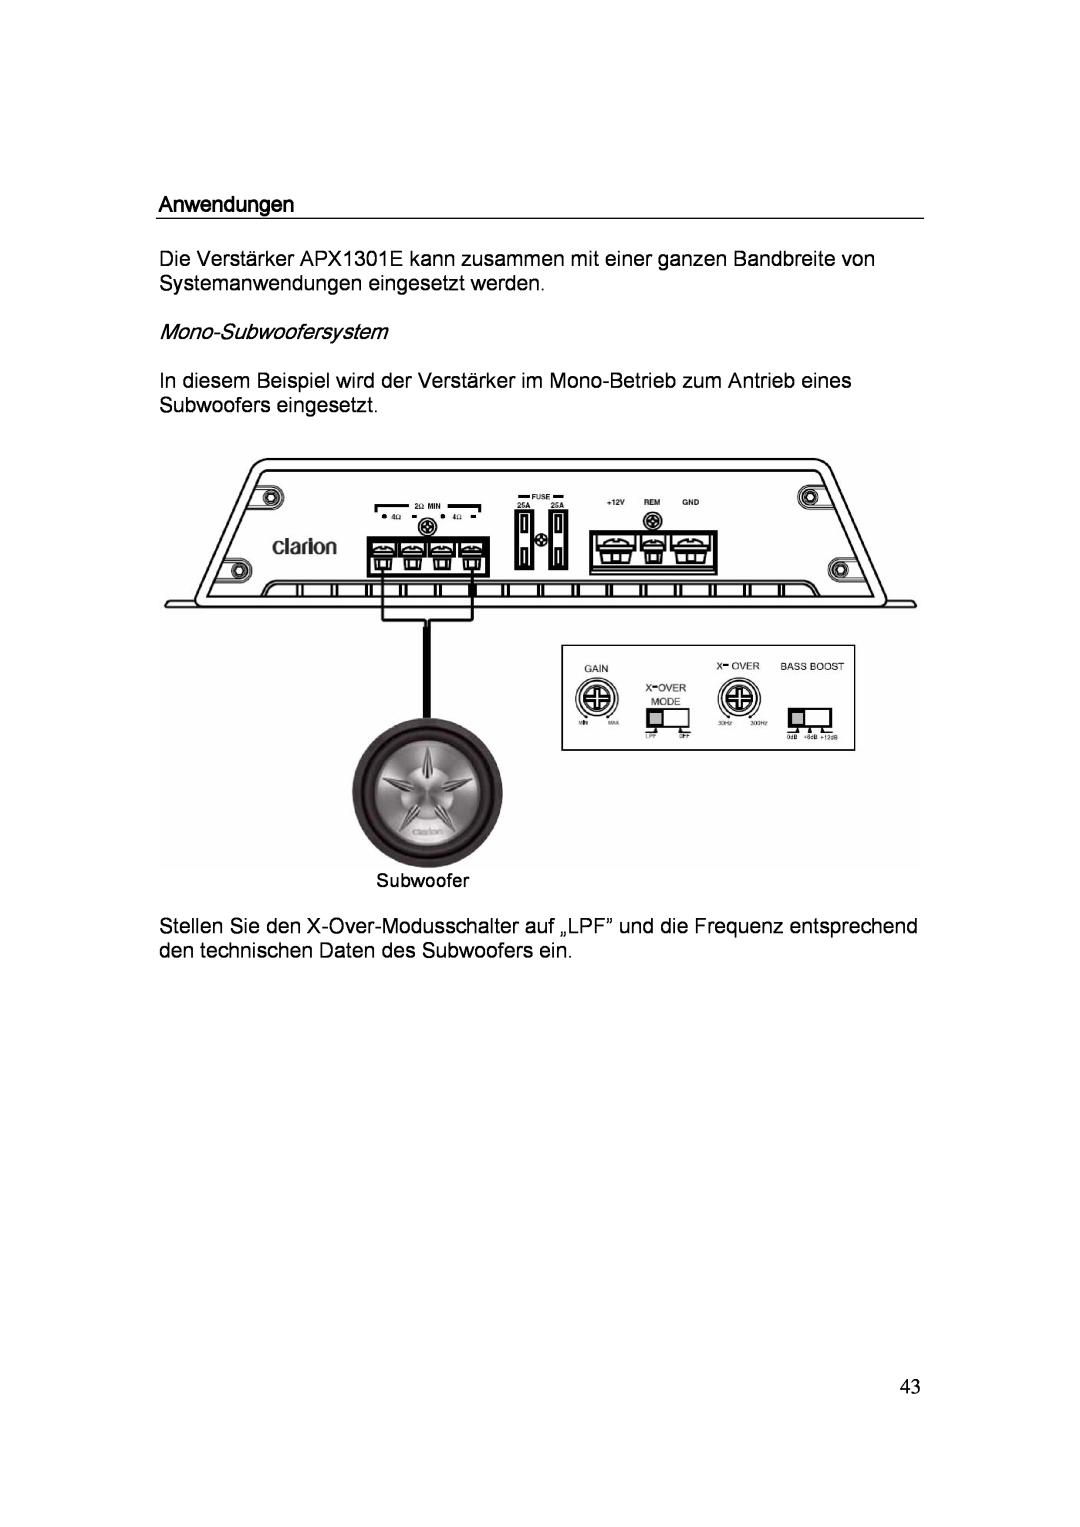 Clarion APX4241E, APX1301E, APX2121E manual Anwendungen, Mono-Subwoofersystem 